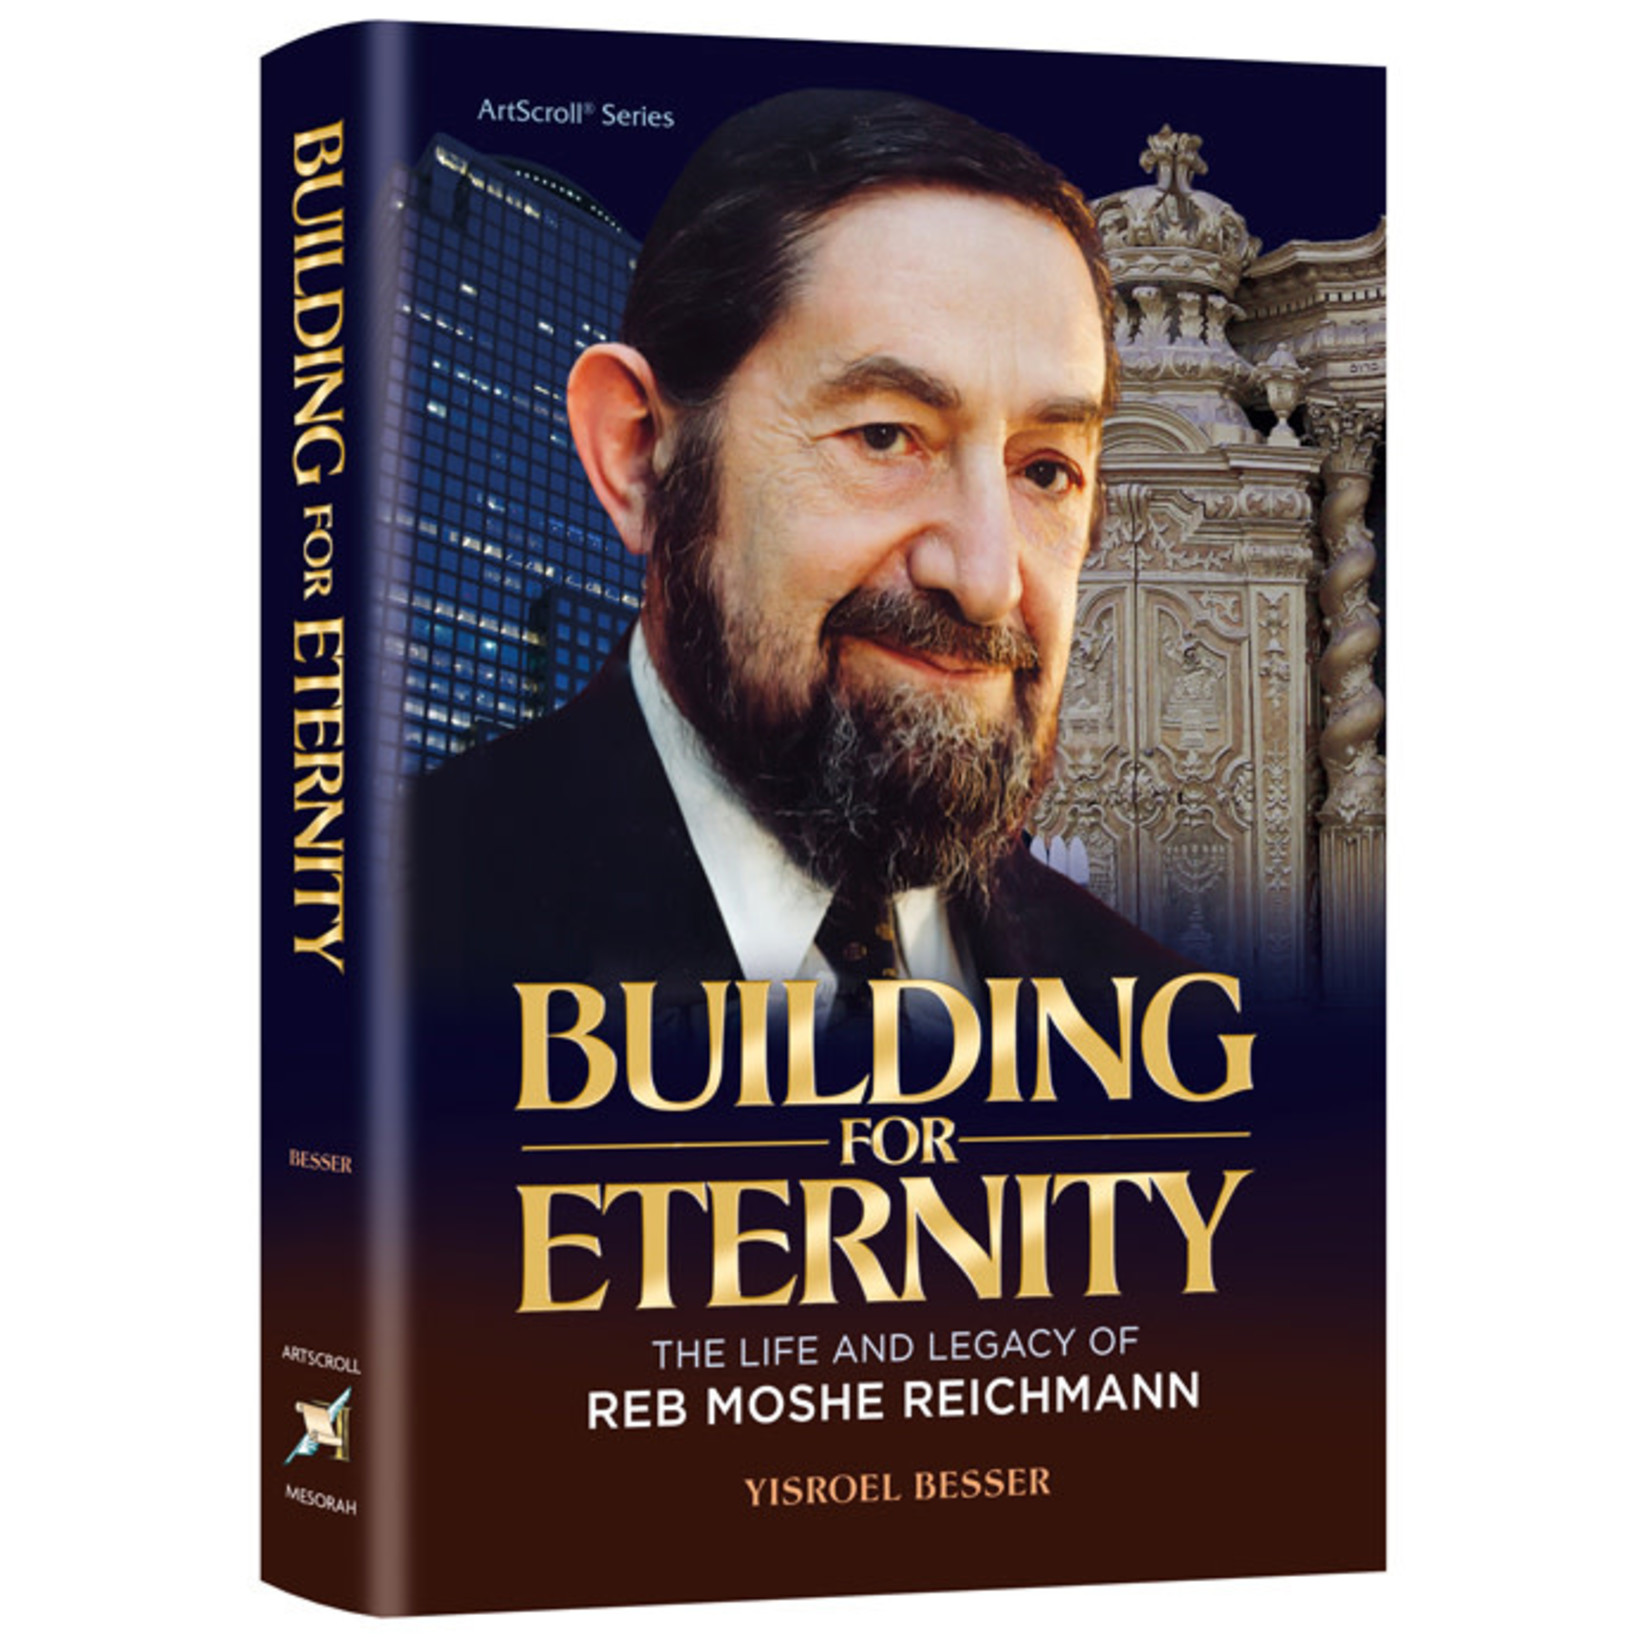 Building for Eternity